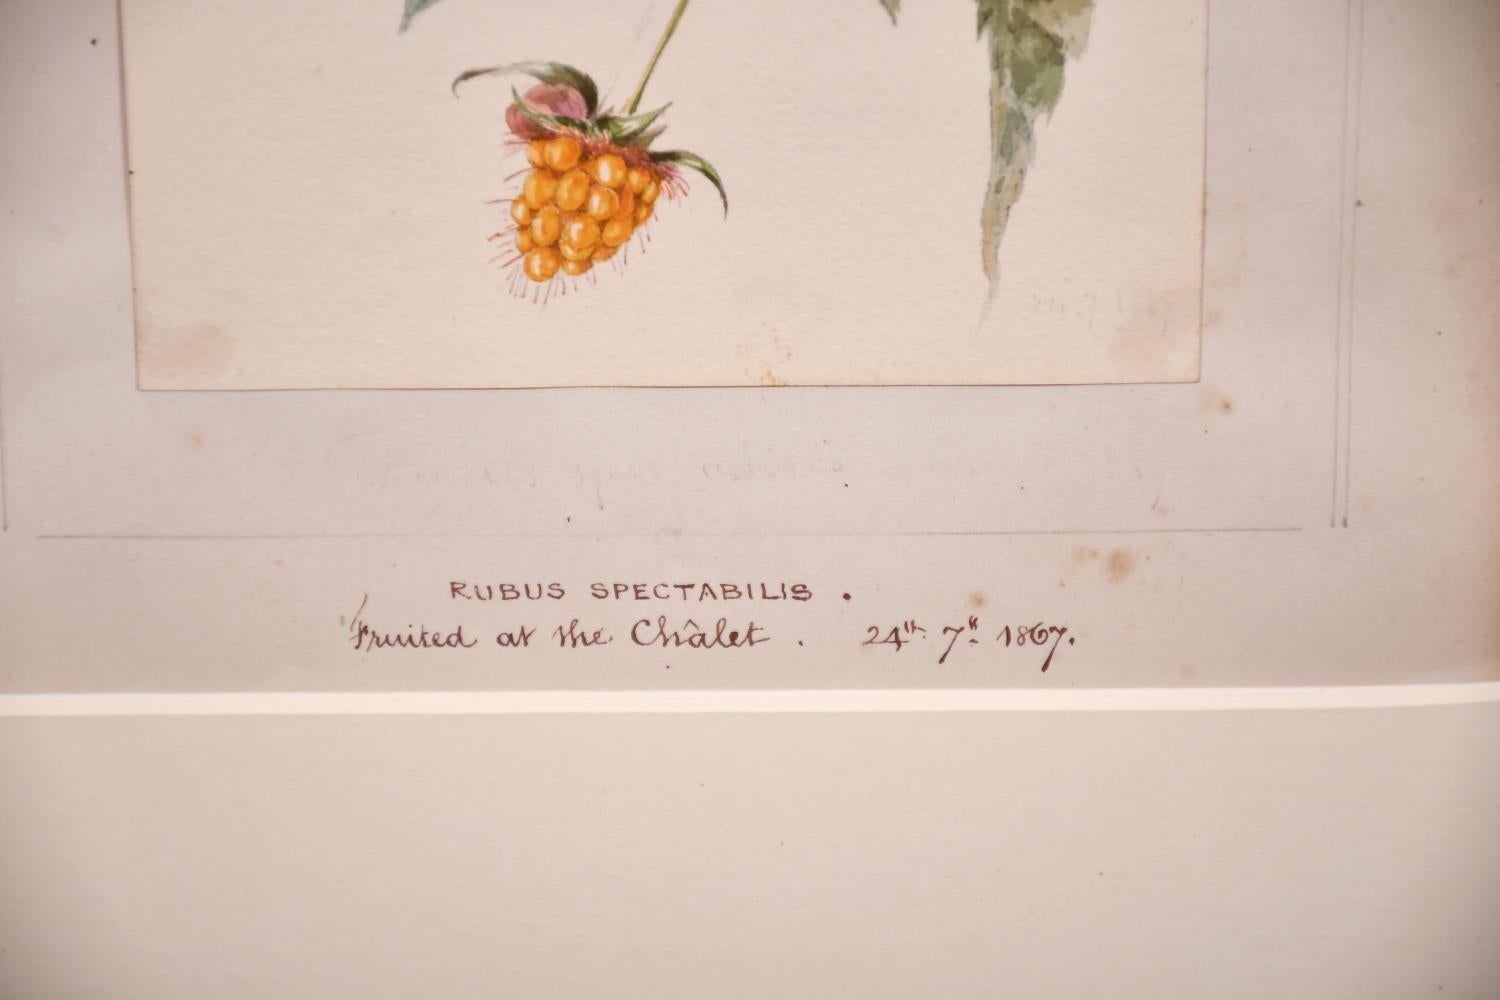 Artist/ School: English/ American School, 19th century, dated 1867

Title: Rubus Spectabilis, (which originated from America).

Medium: watercolour drawing on paper, with ink writing below

Size: image of fruit: 7 x 5 inches, image within